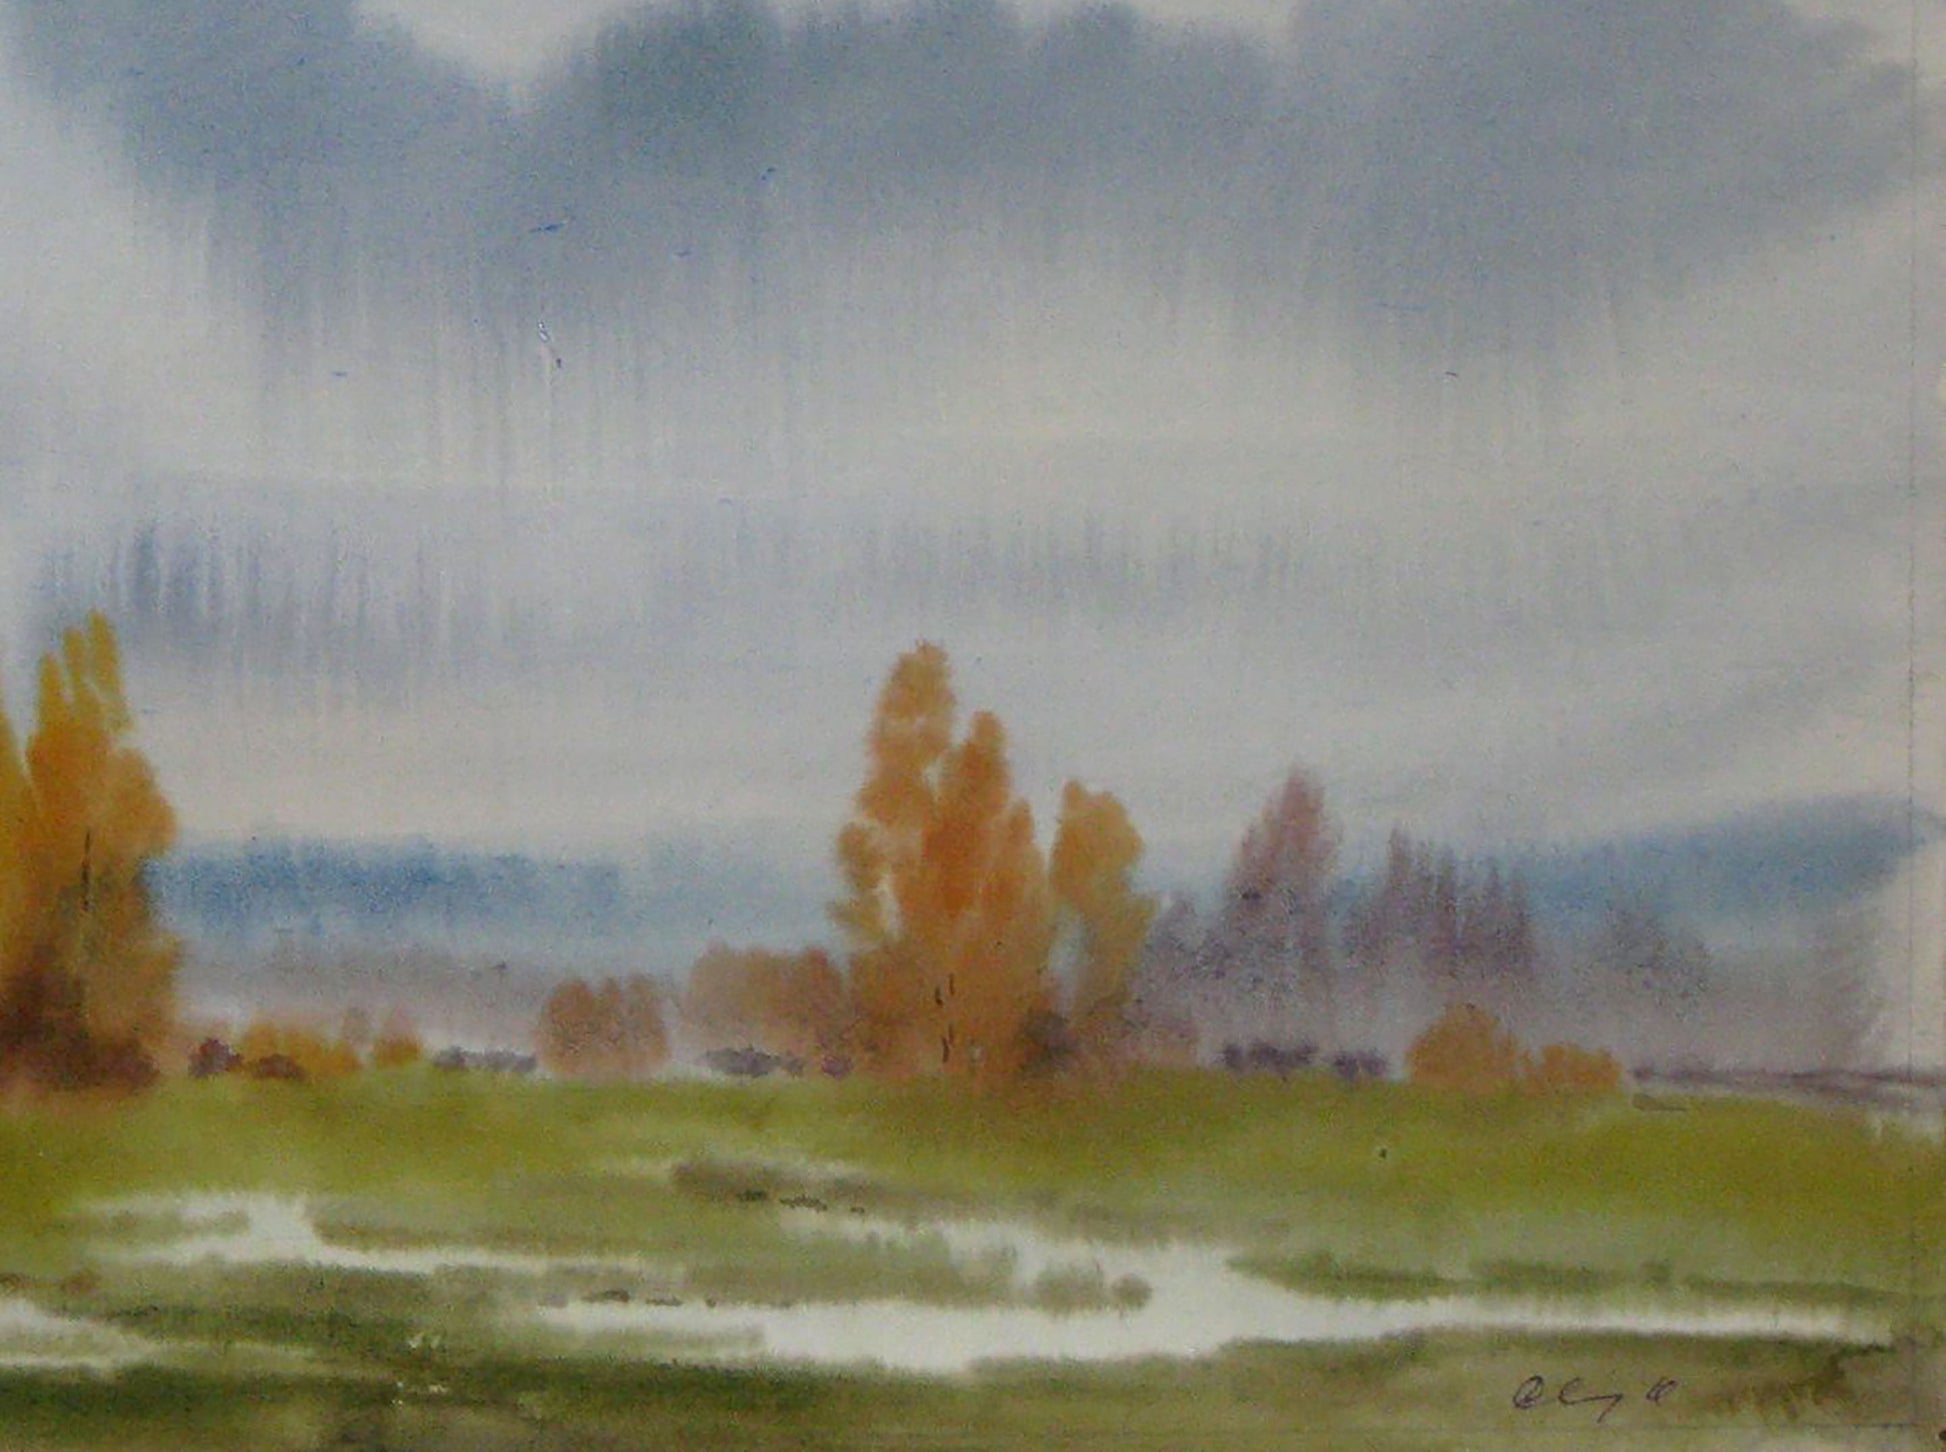 Rainy Weather, depicted in watercolor by Valery Savenets